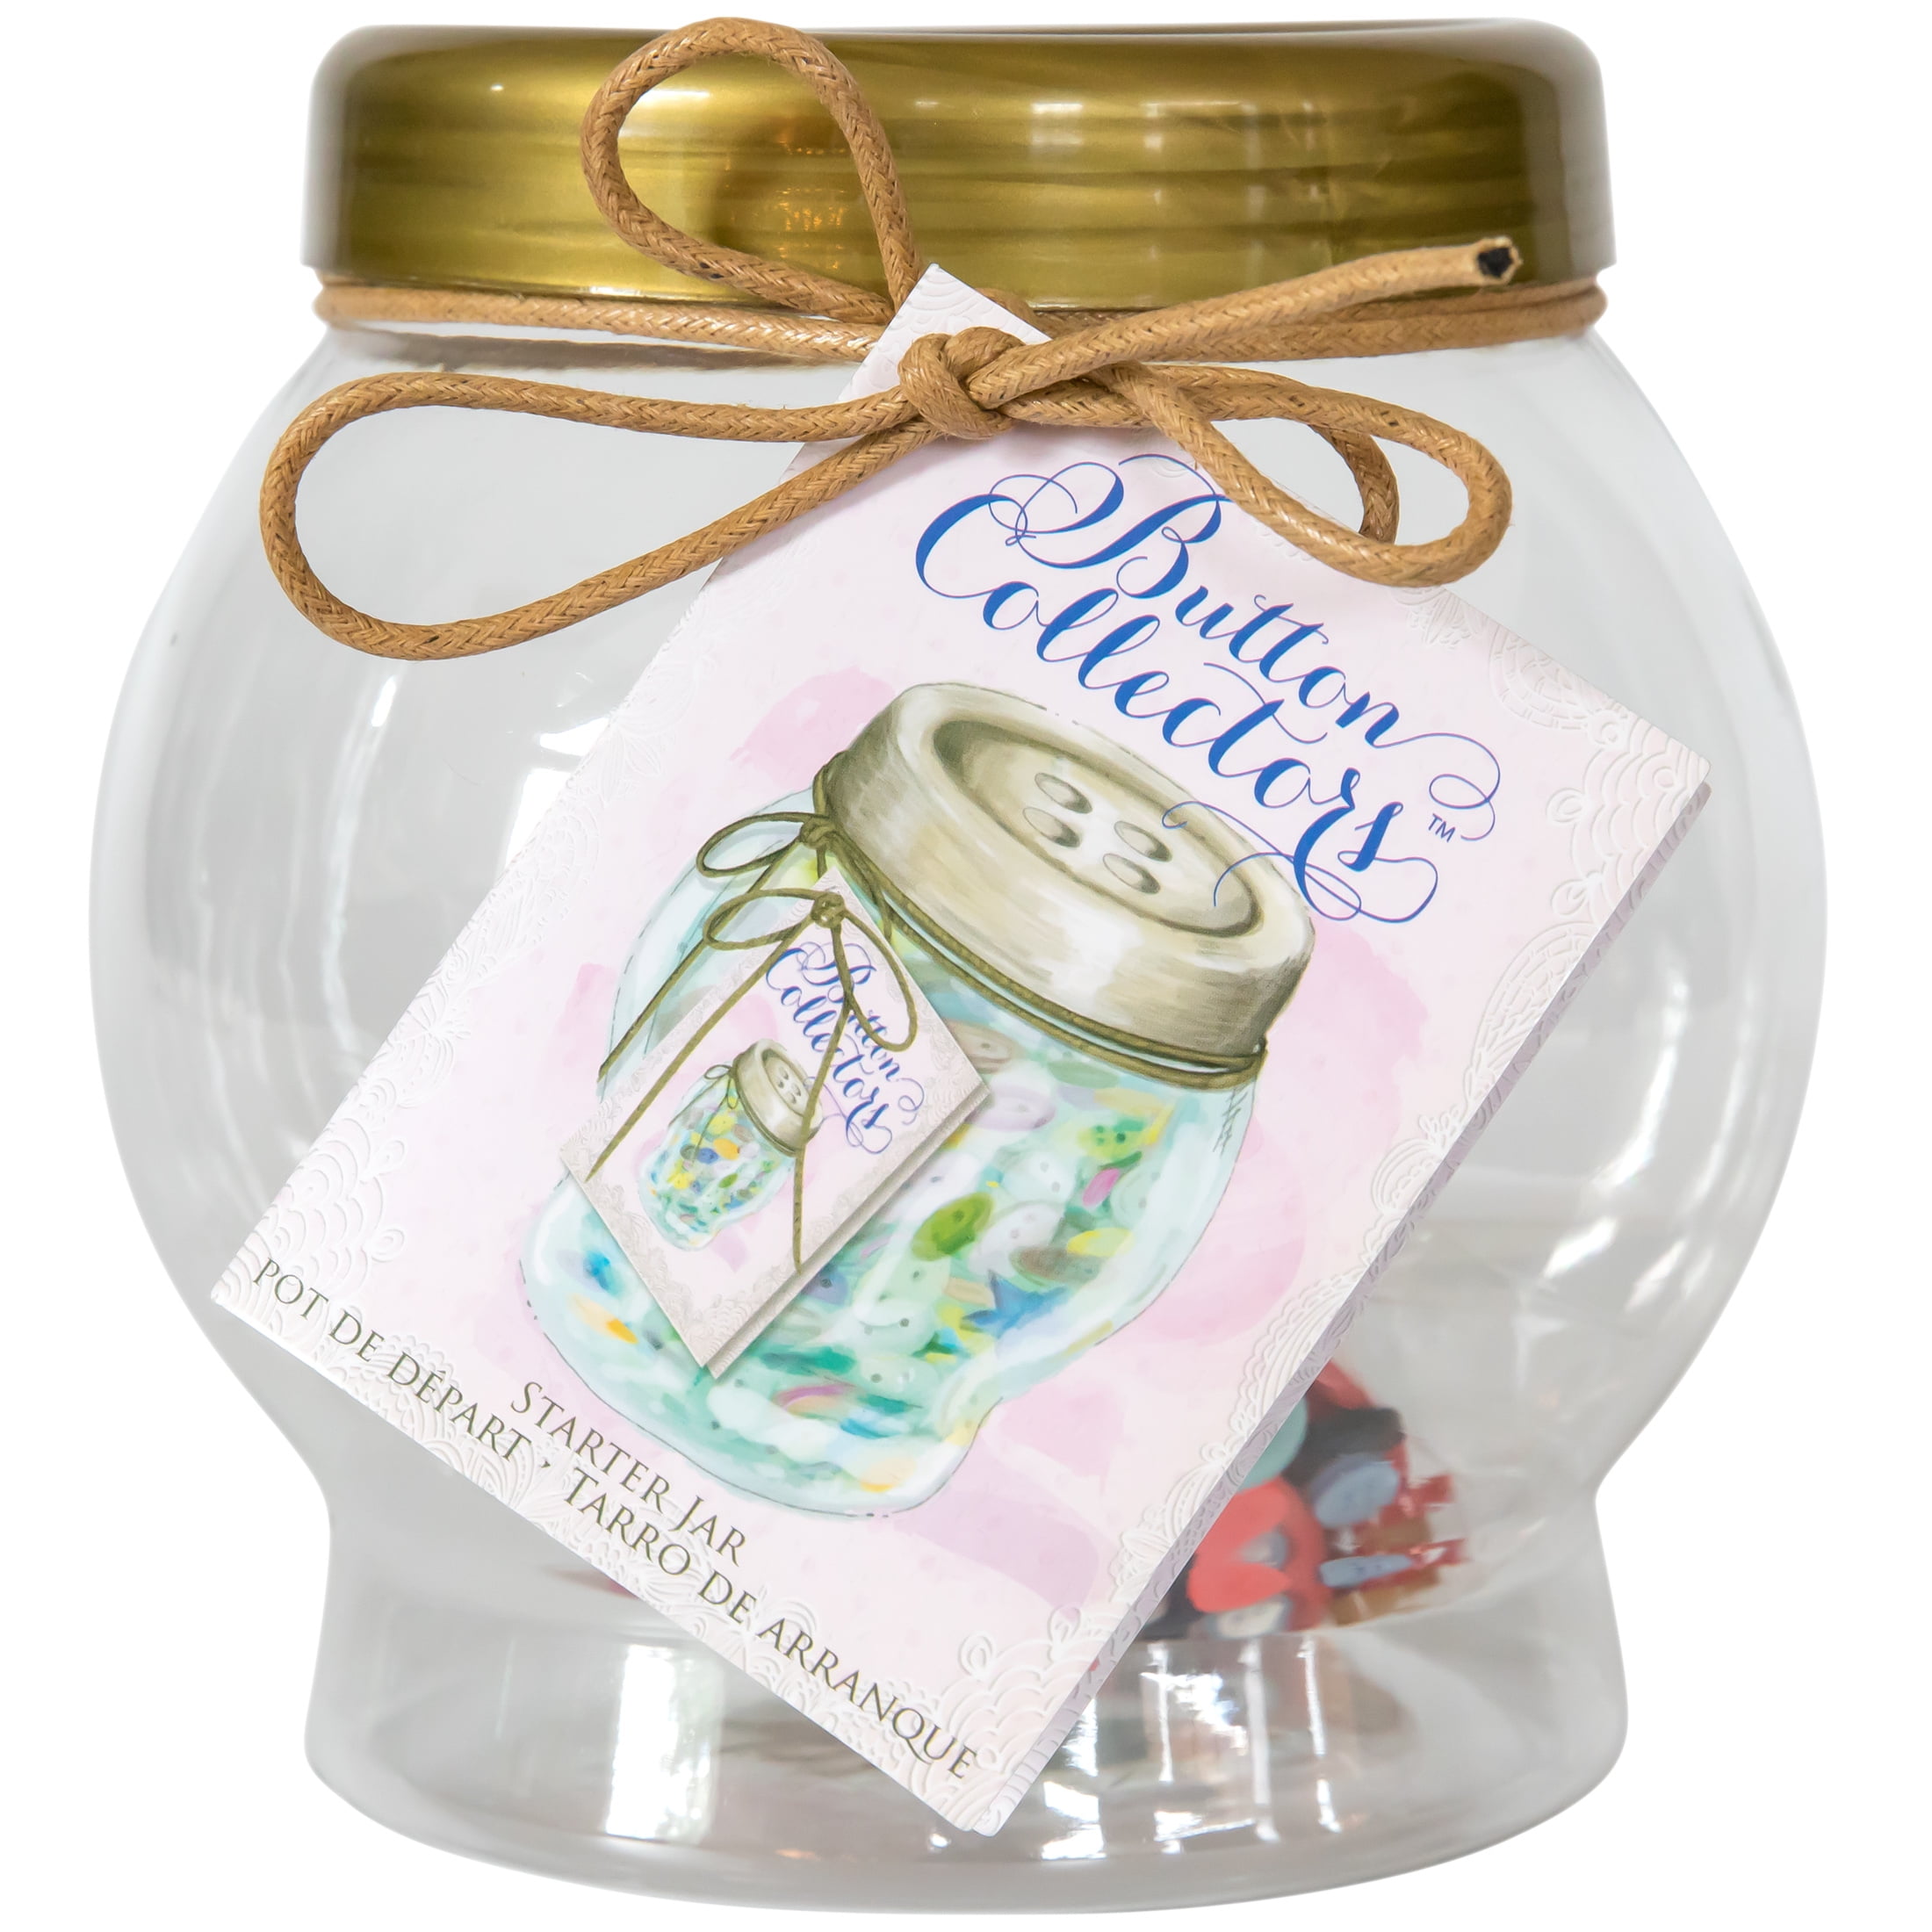 Button Collector's "Button Collectors" Gold Tone Button Shaped Lid Plastic Storage Jar, Clear